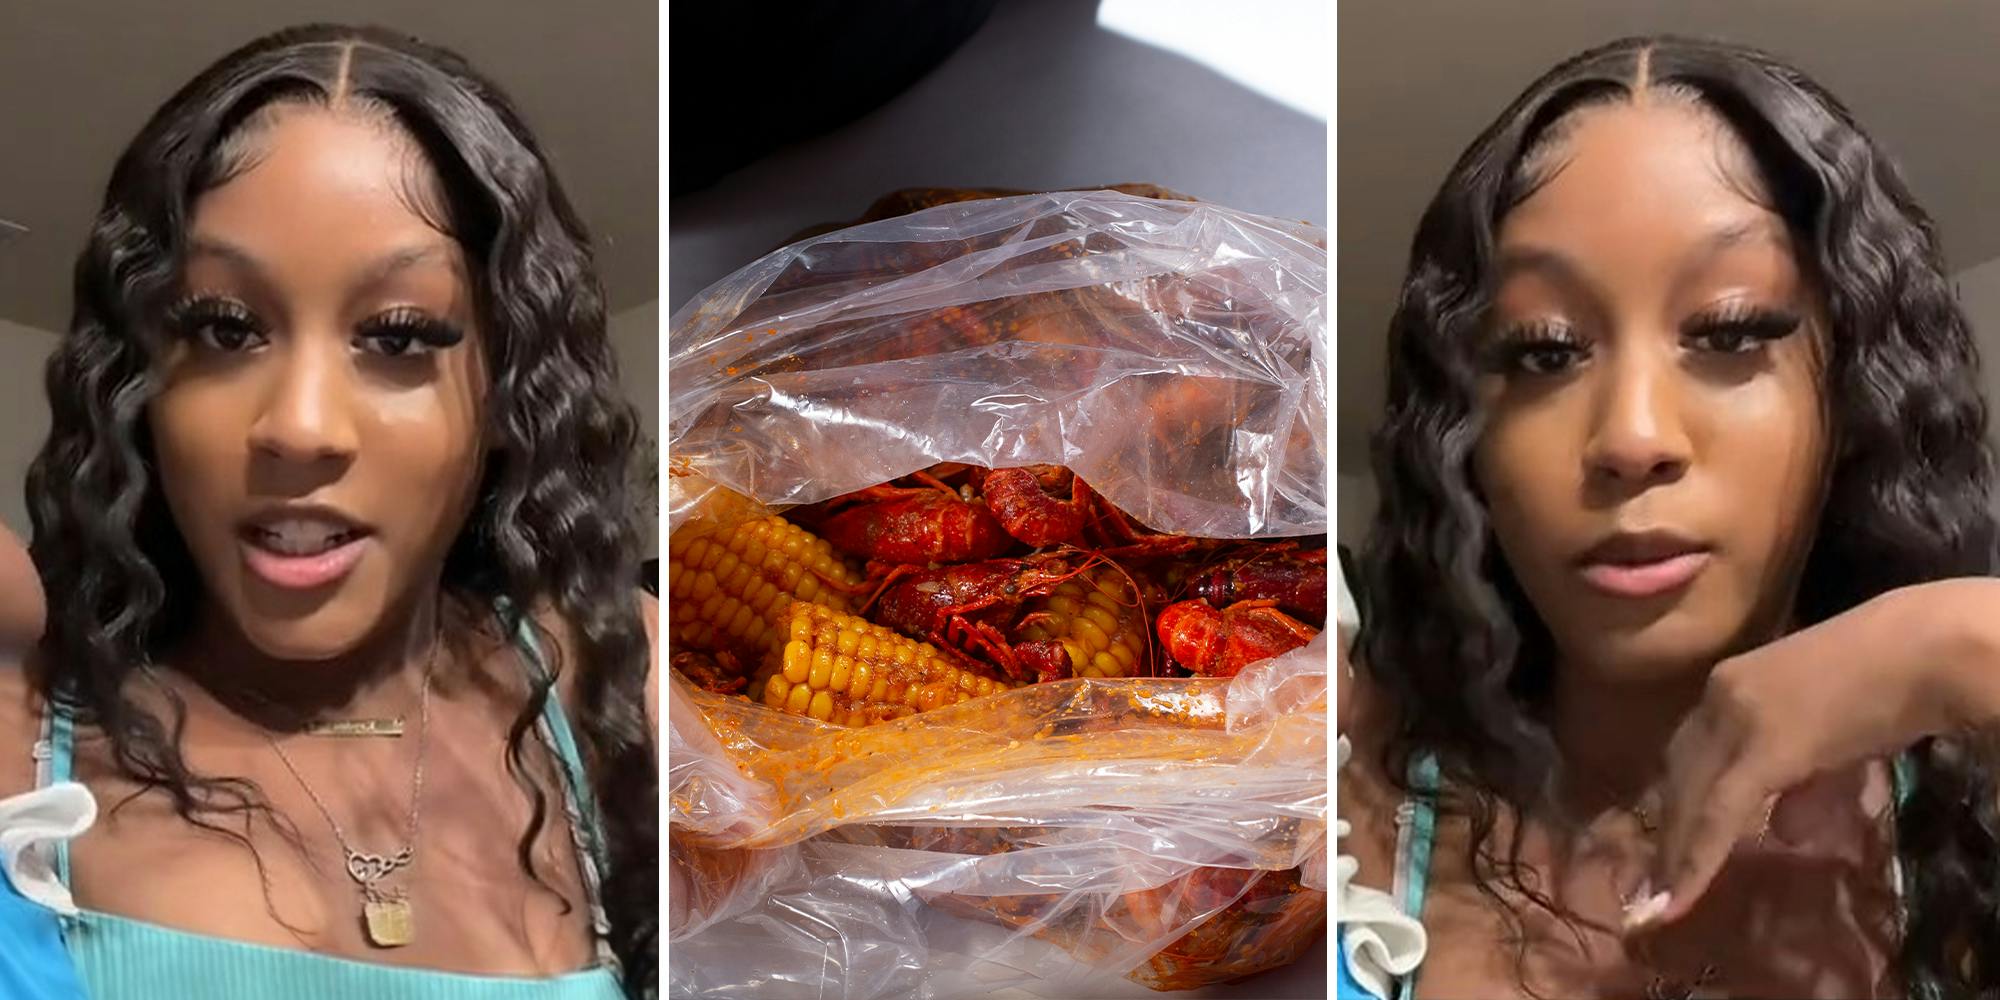 Woman orders $30 seafood boil from Facebook Marketplace. She can't believe how they bagged it